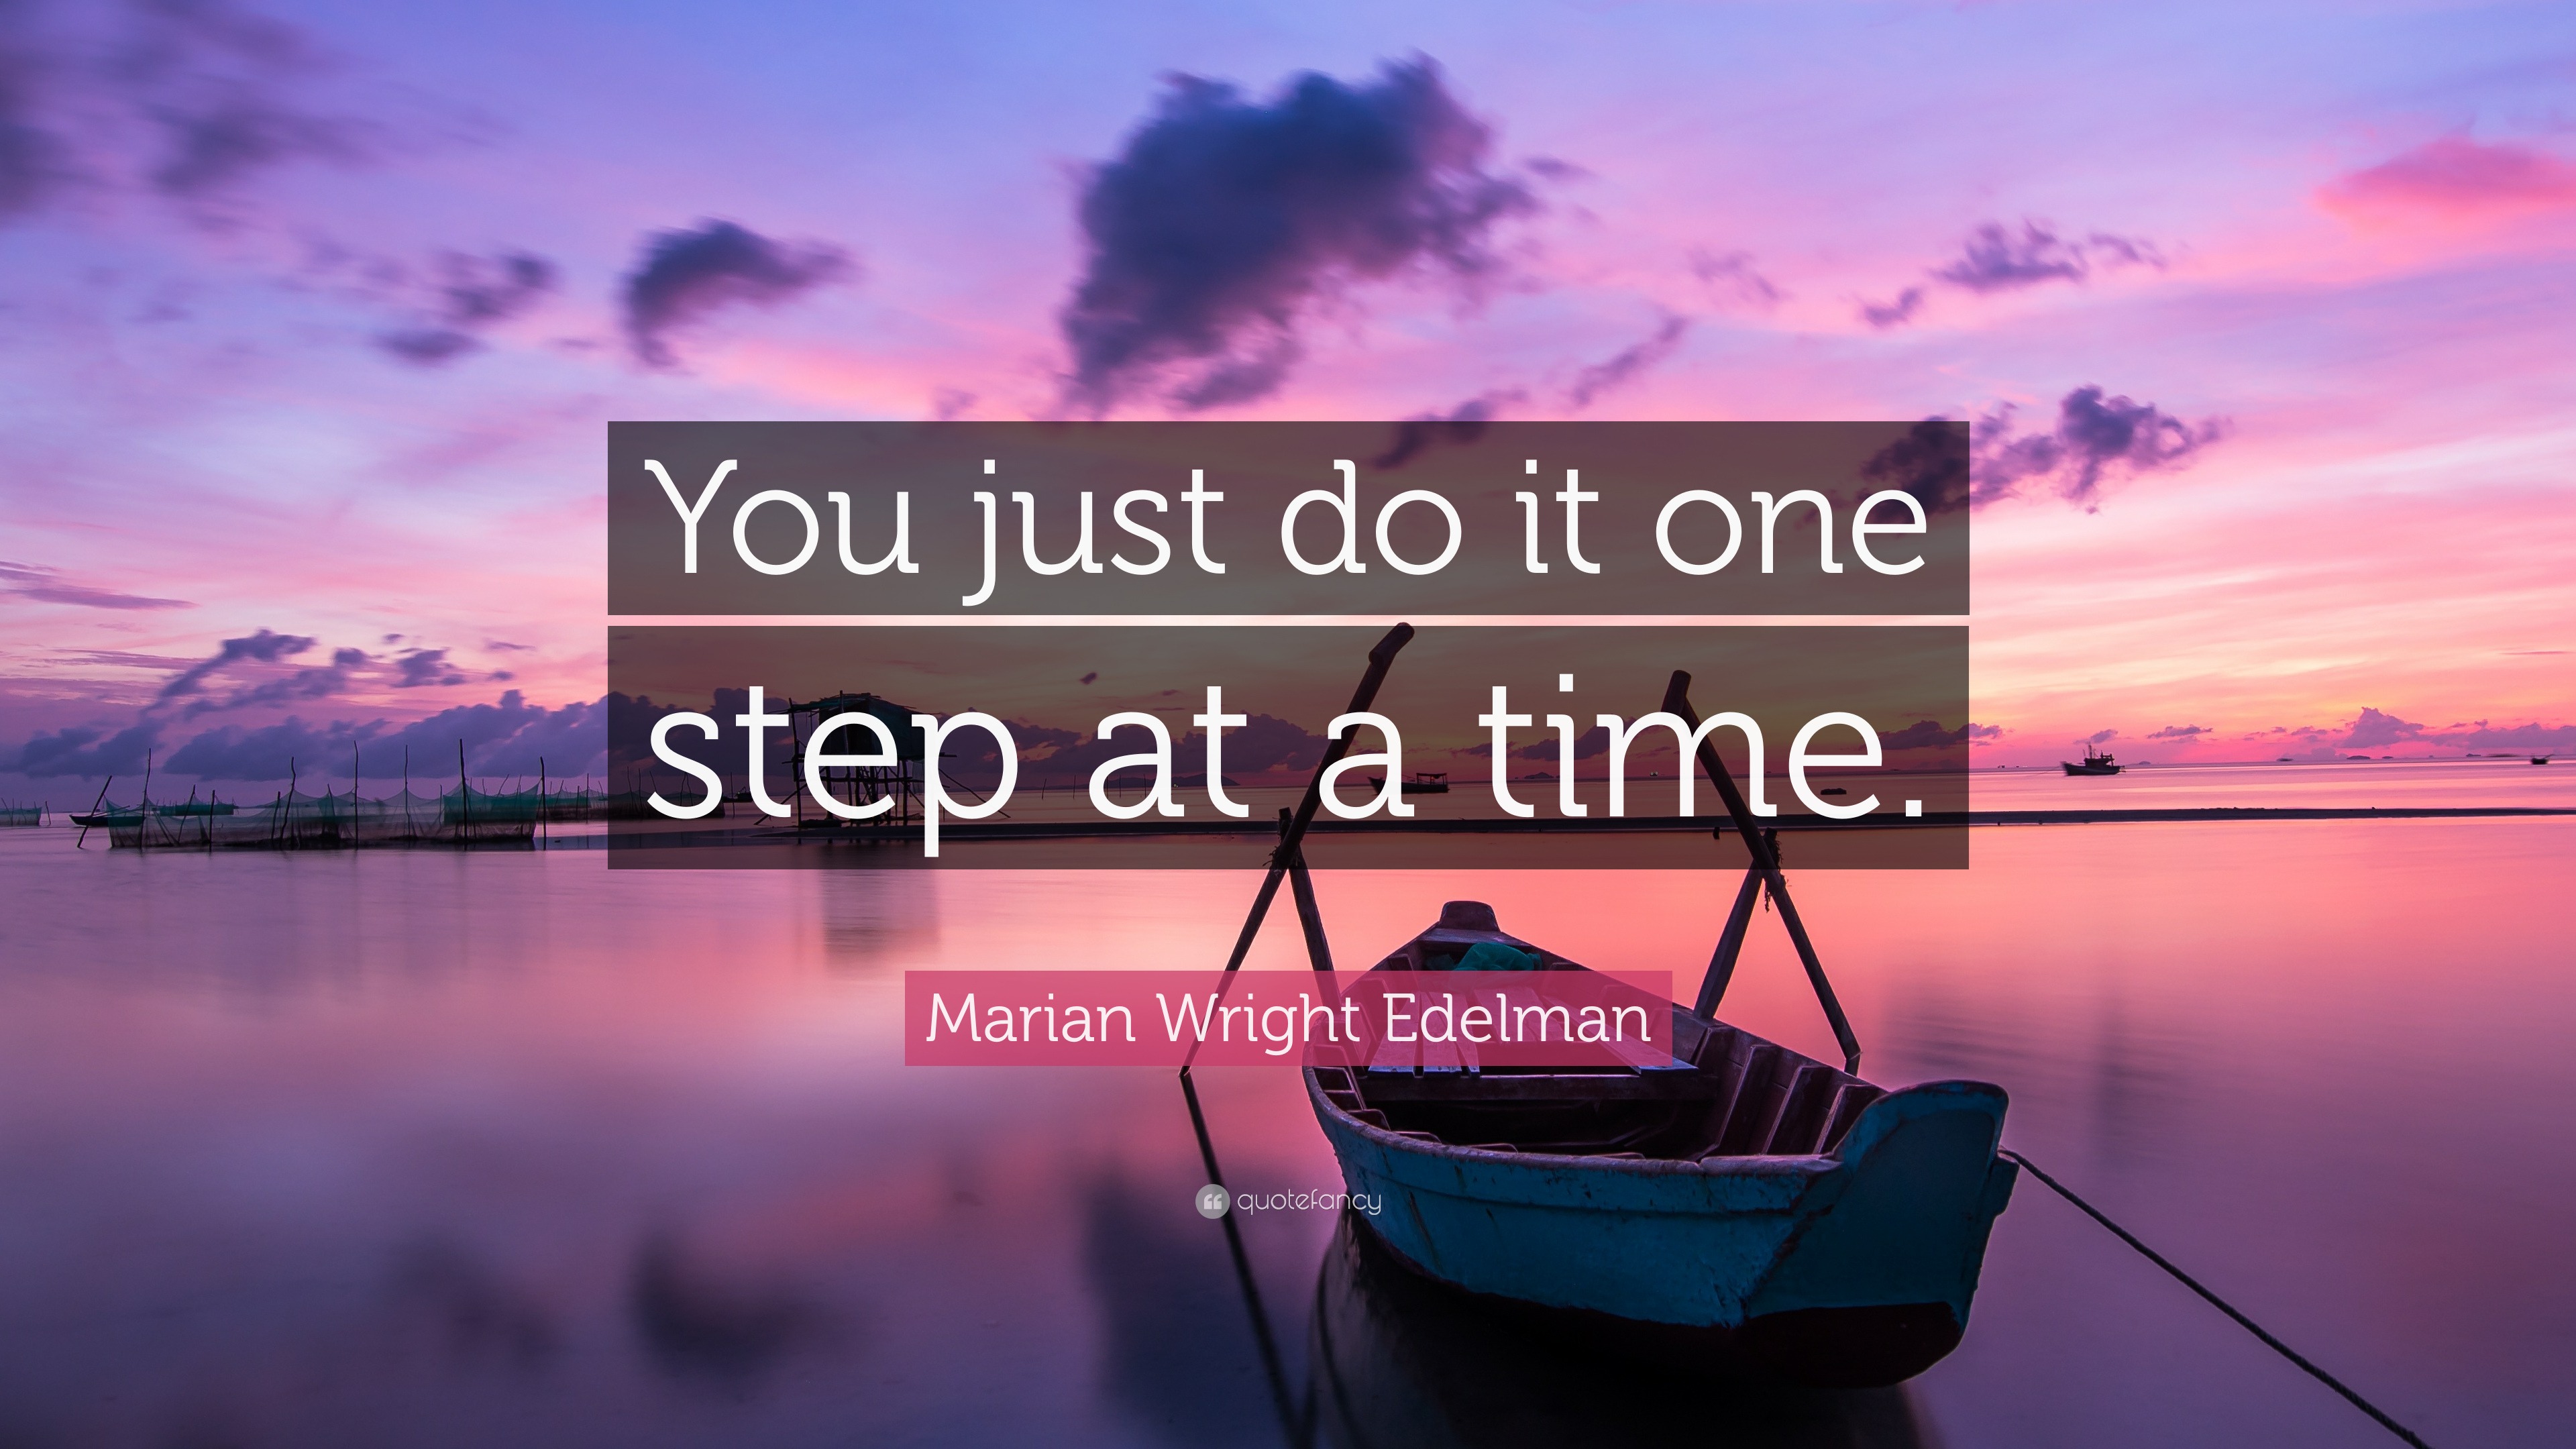 “You just do it one step at a time.”